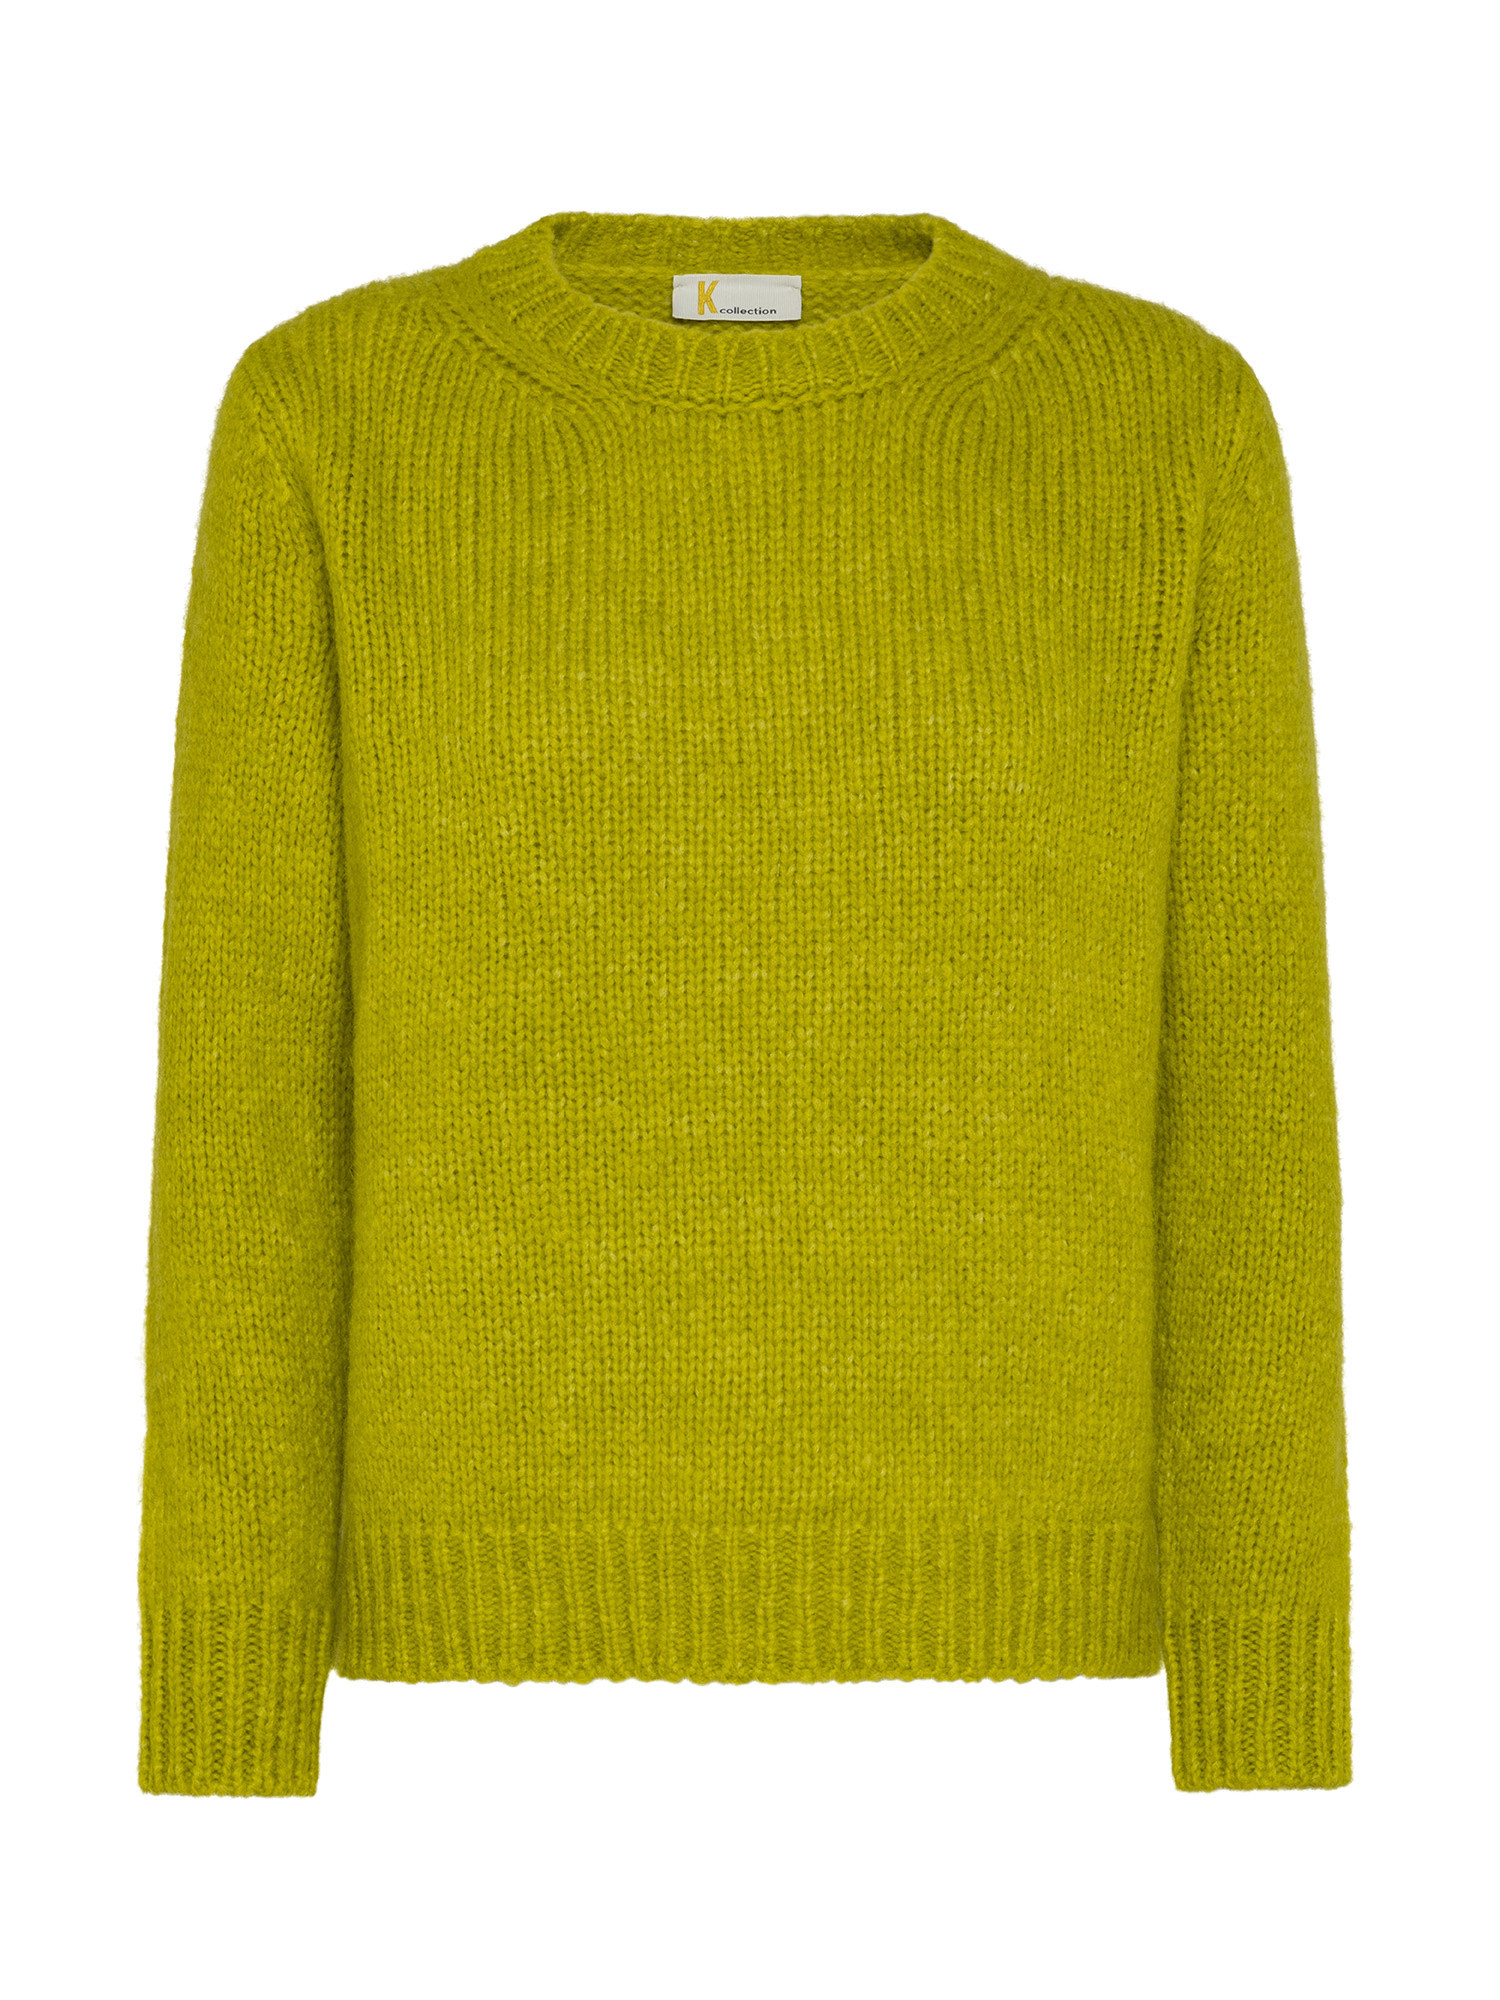 K Collection - Crewneck sweater, Green Apple, large image number 0